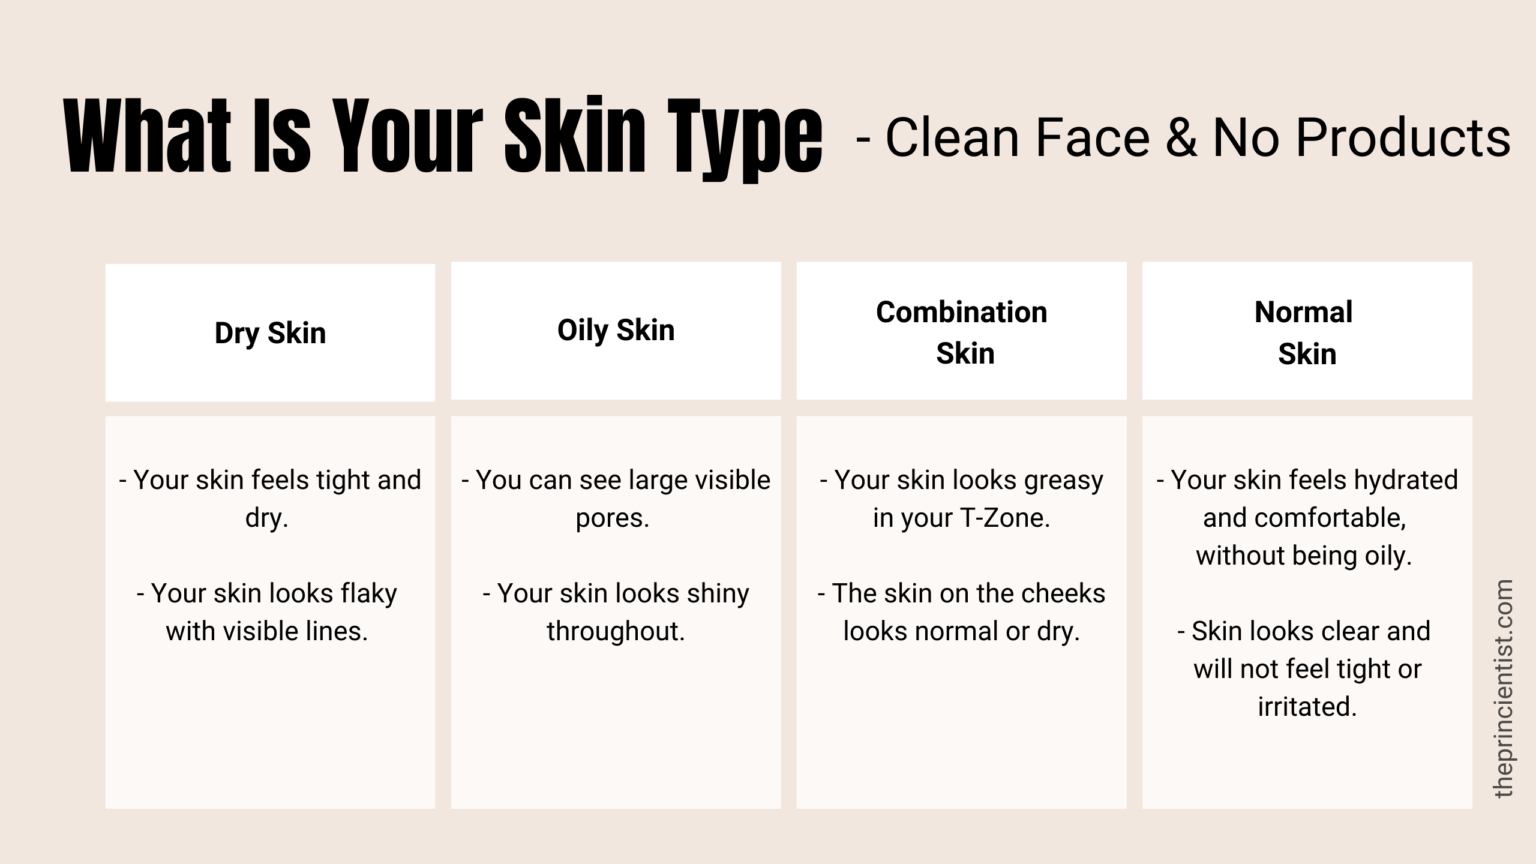 what is your skin type - all skin types and their characteristics